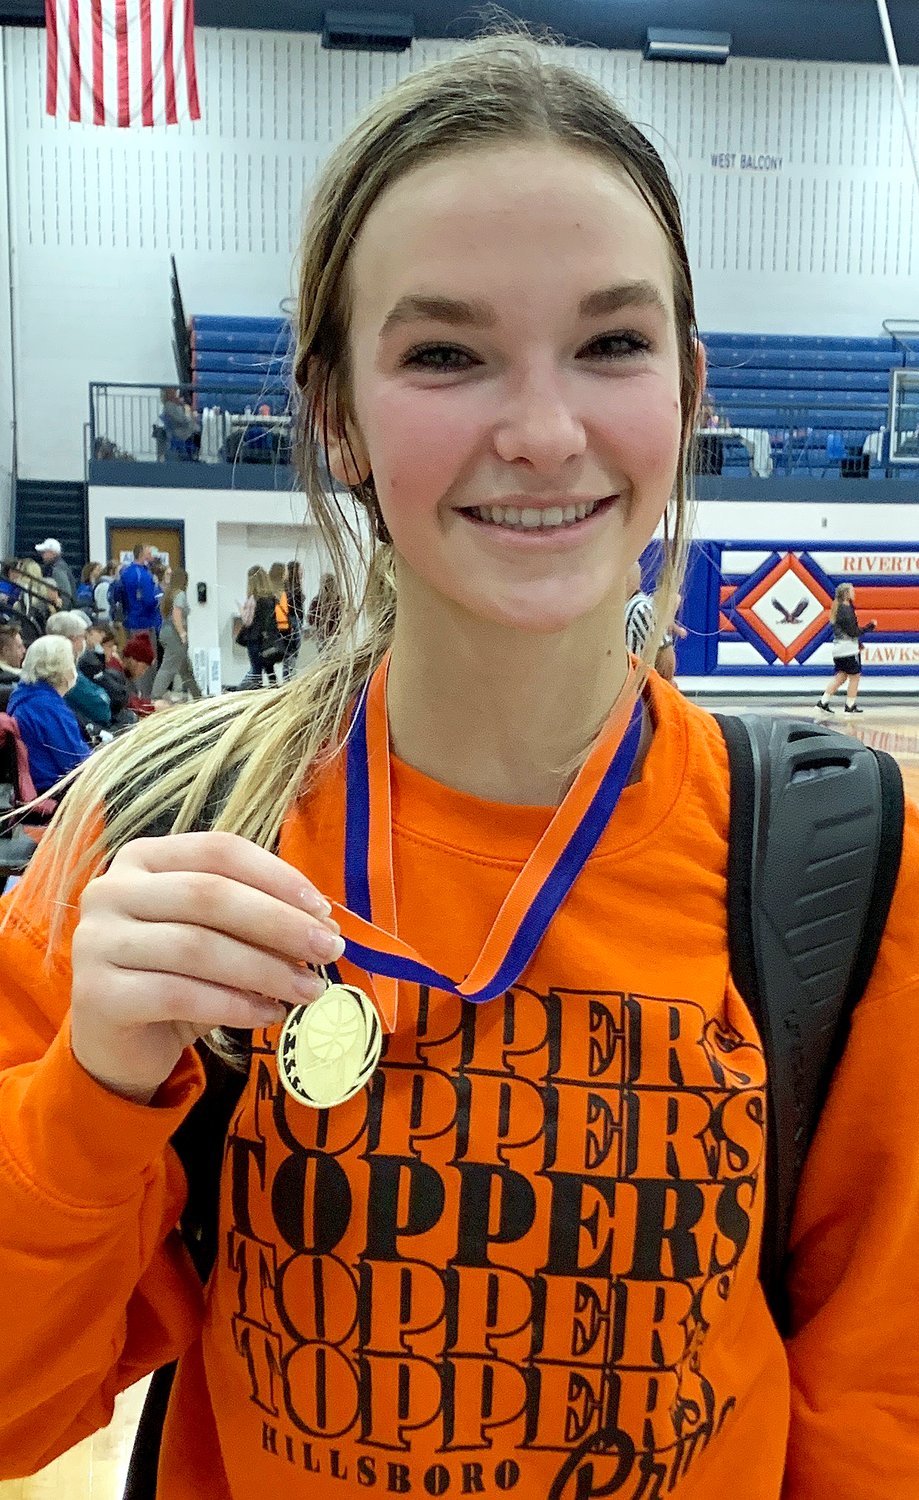 Hillsboro's Layne Rupert was among those named to the all-tournament team at the Riverton Christmas Classic, held Dec. 27-30 in Riverton. Rupert averaged just over 20 points per game for the Toppers, with 101 points in five games, four of which Hillsboro won.